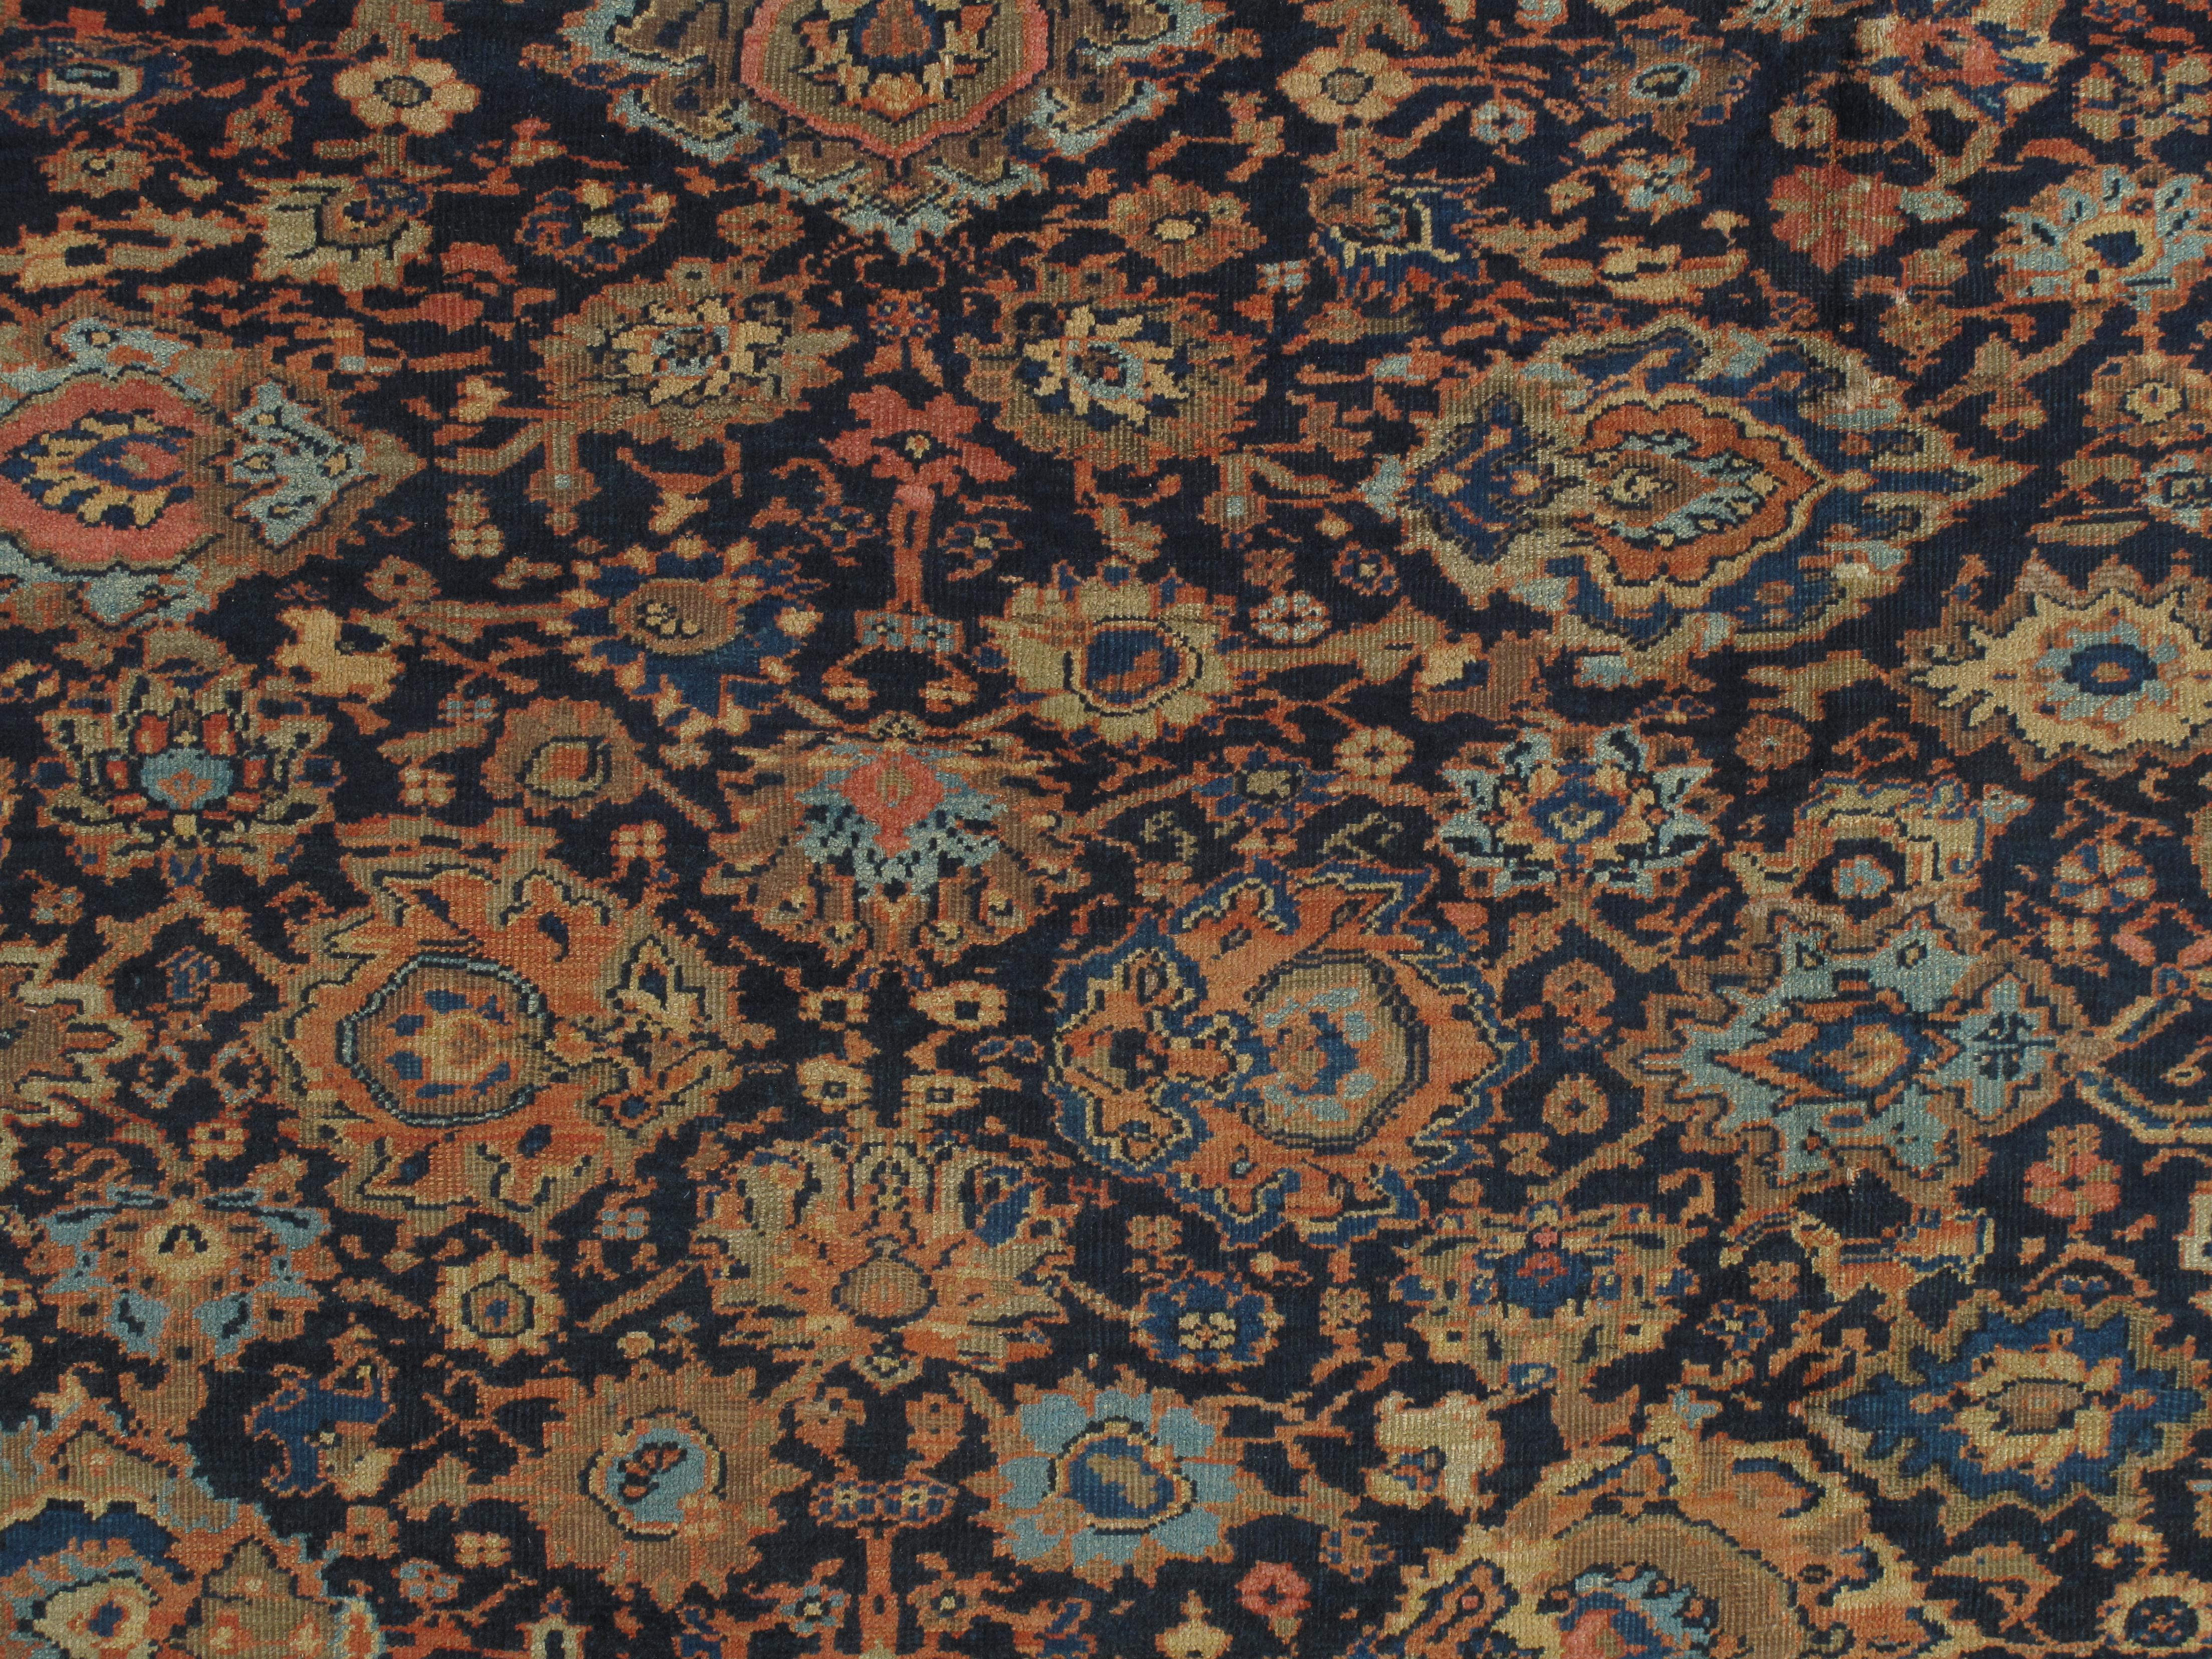 Antique Persian Sultanabad Carpet, Handmade Oriental Rug, Navy Blue, Rust, Gold For Sale 5